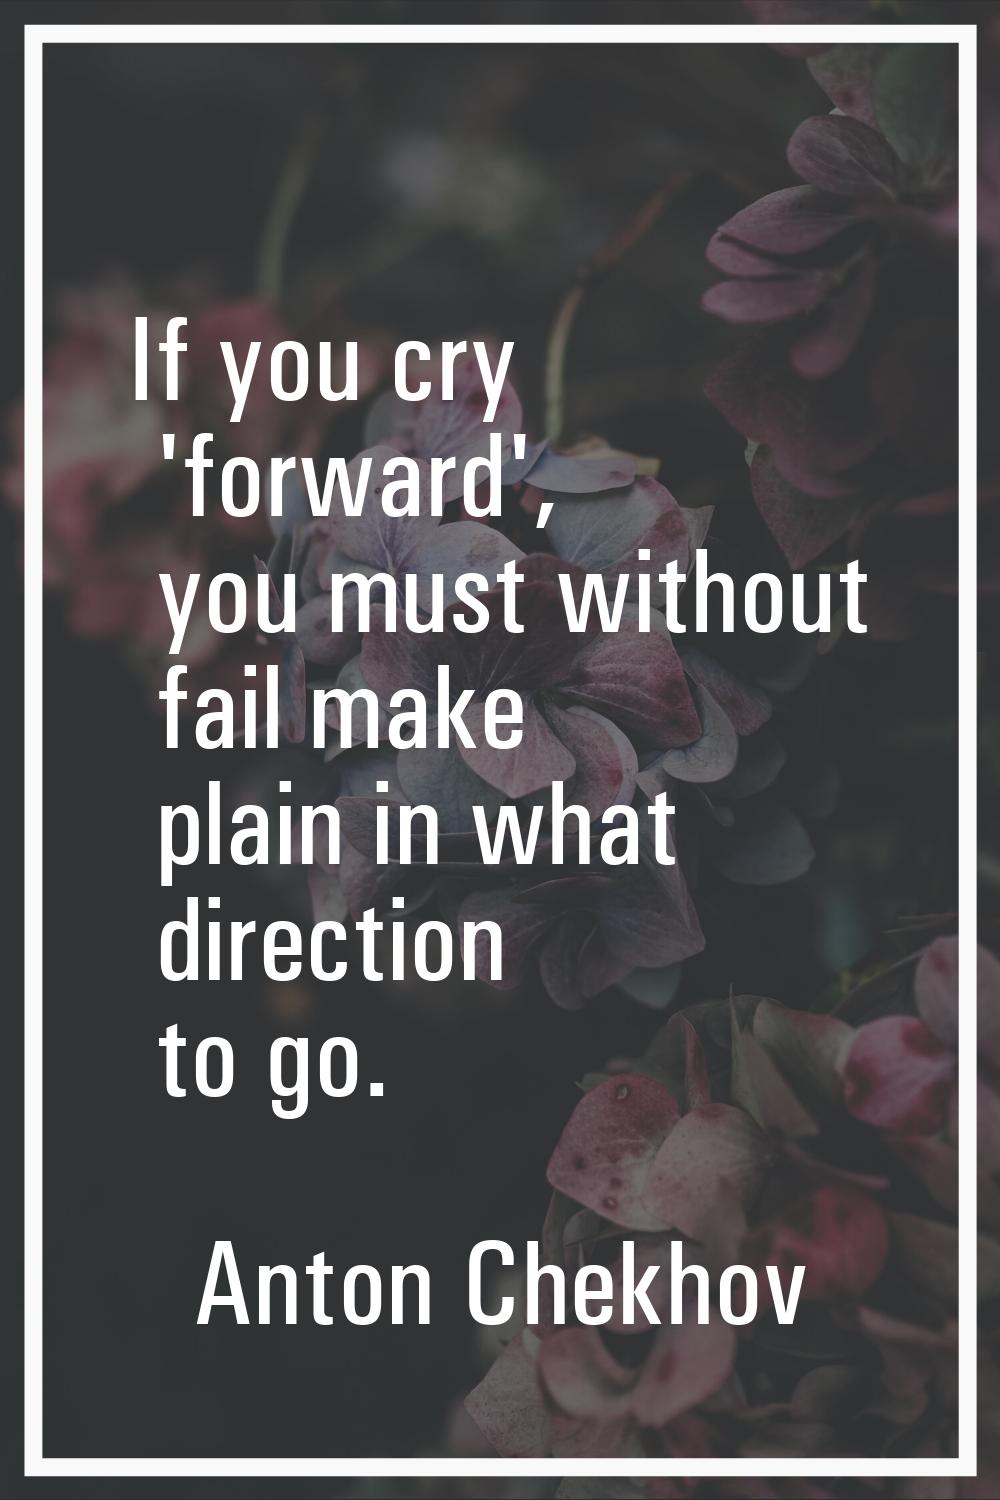 If you cry 'forward', you must without fail make plain in what direction to go.